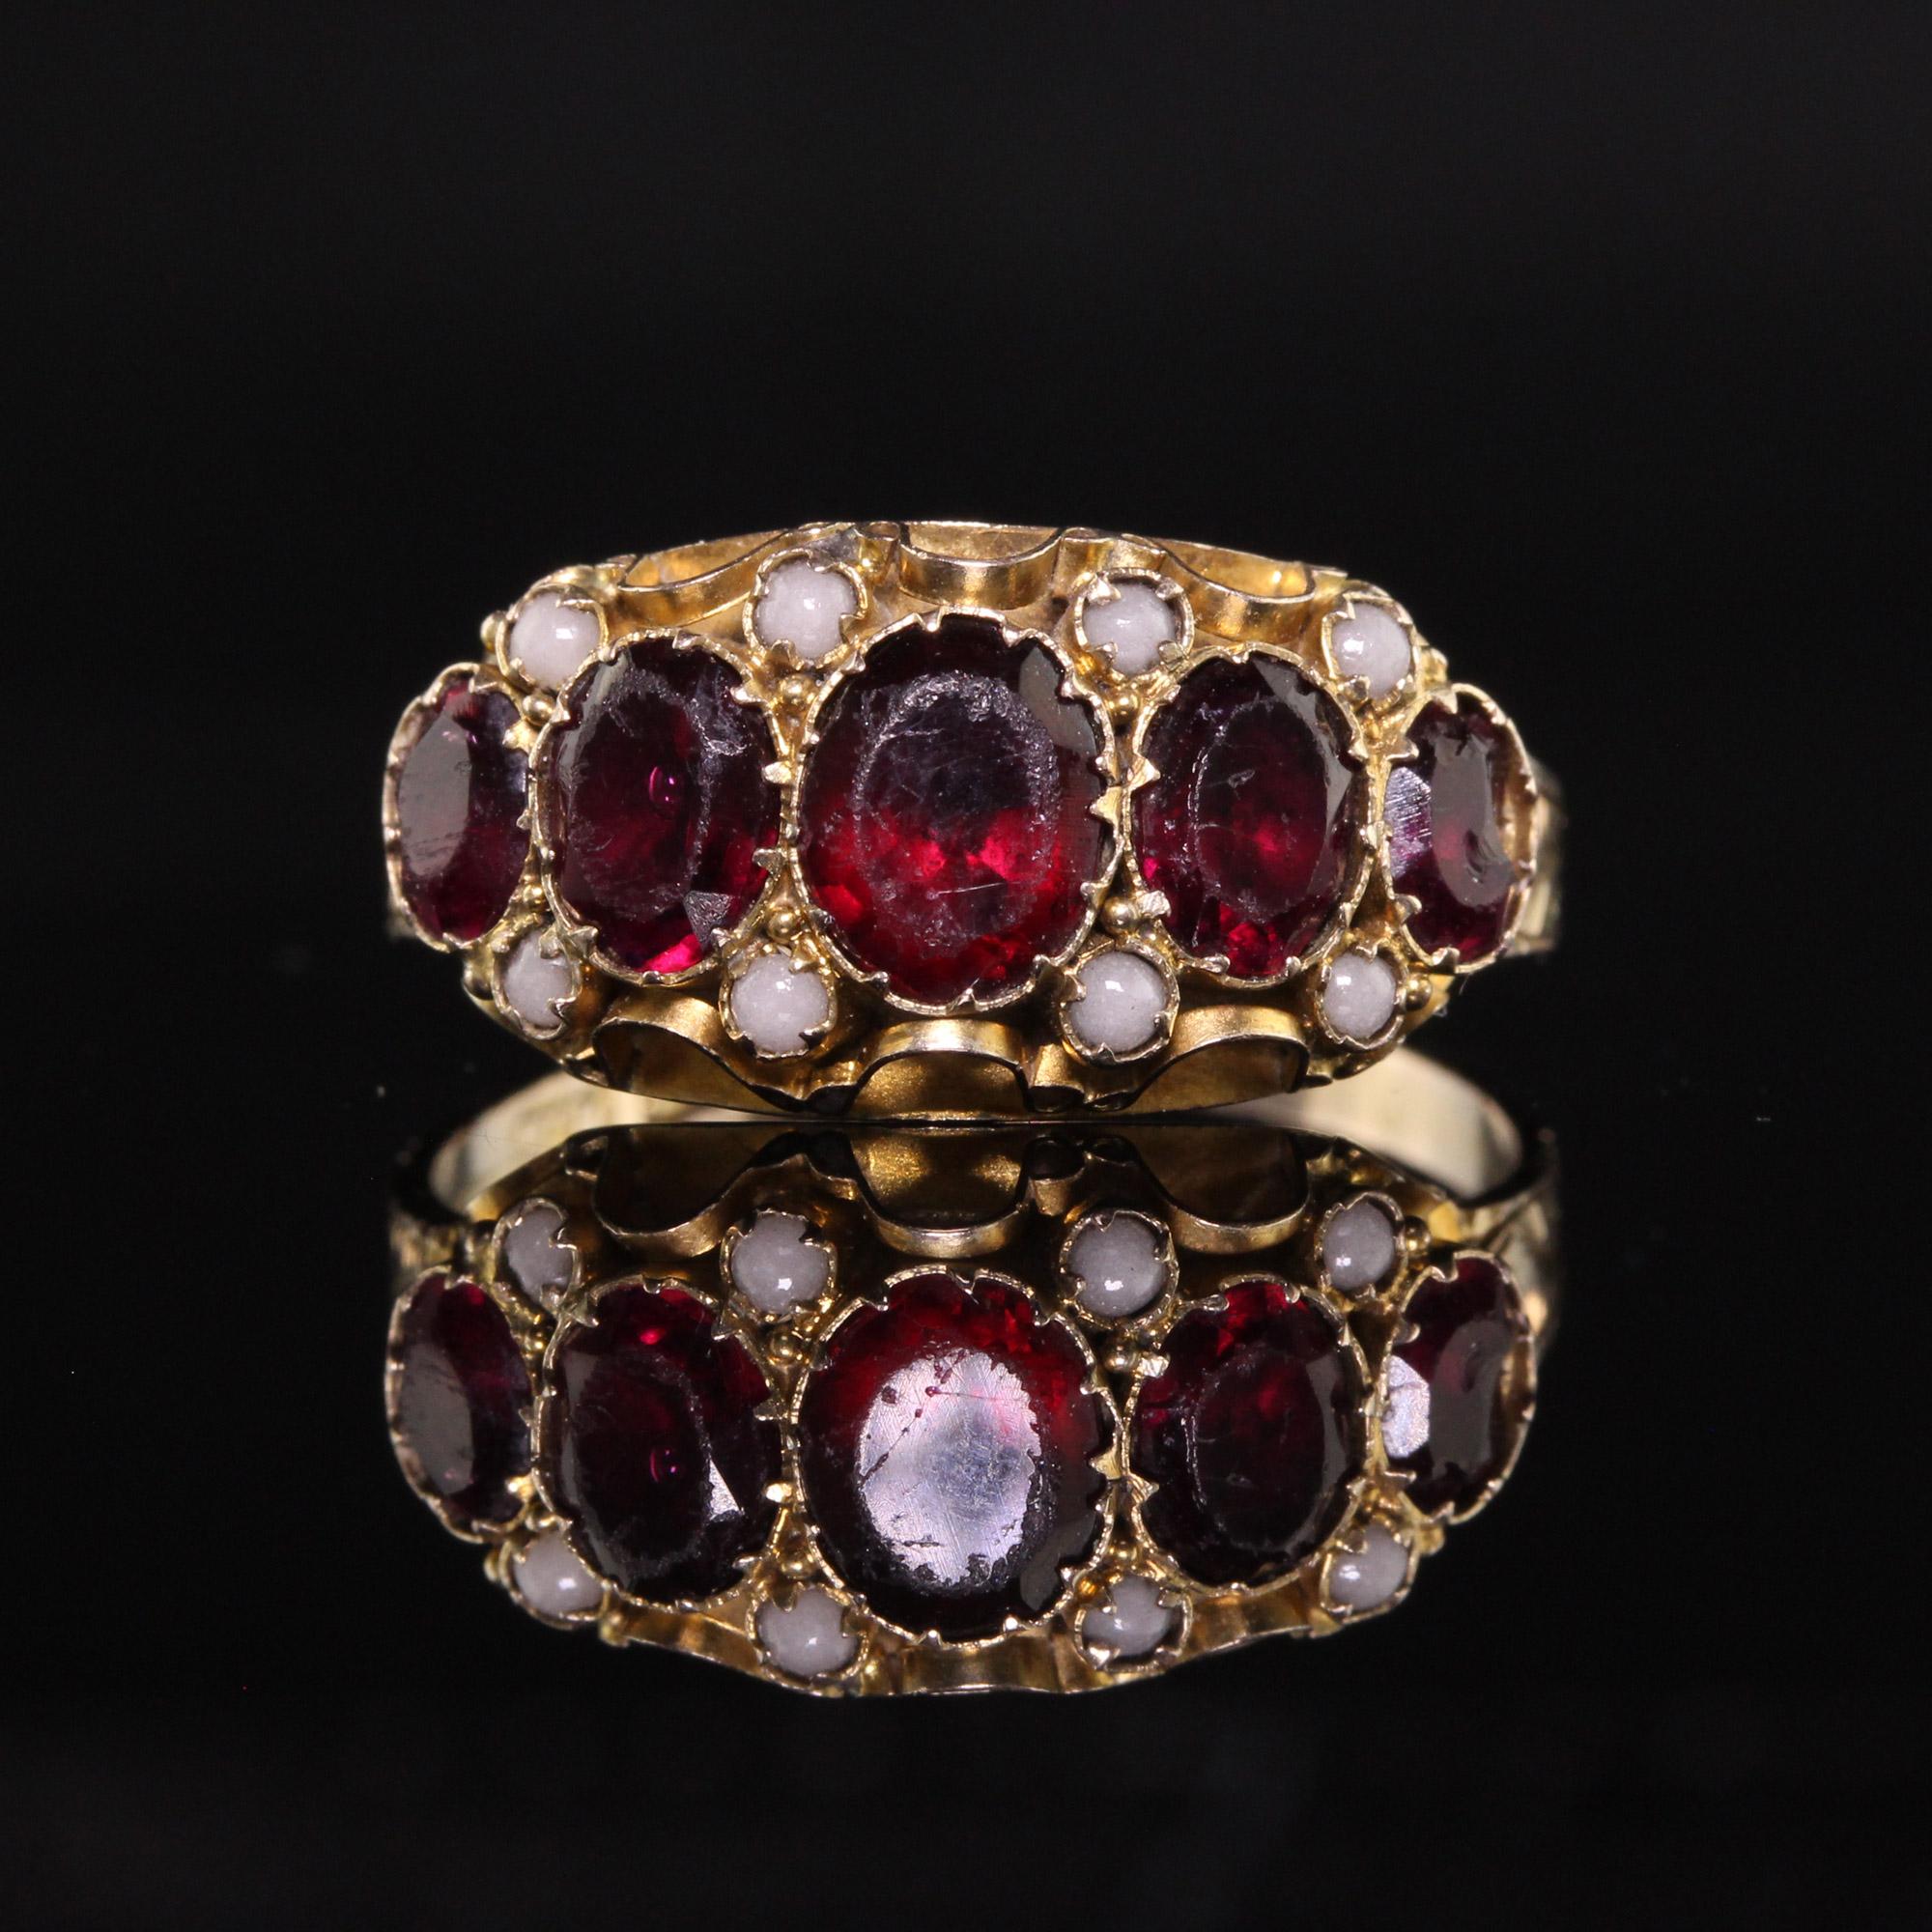 Oval Cut Antique Victorian 9K Yellow Gold Garnet and Seed Pearl Five Stone Ring